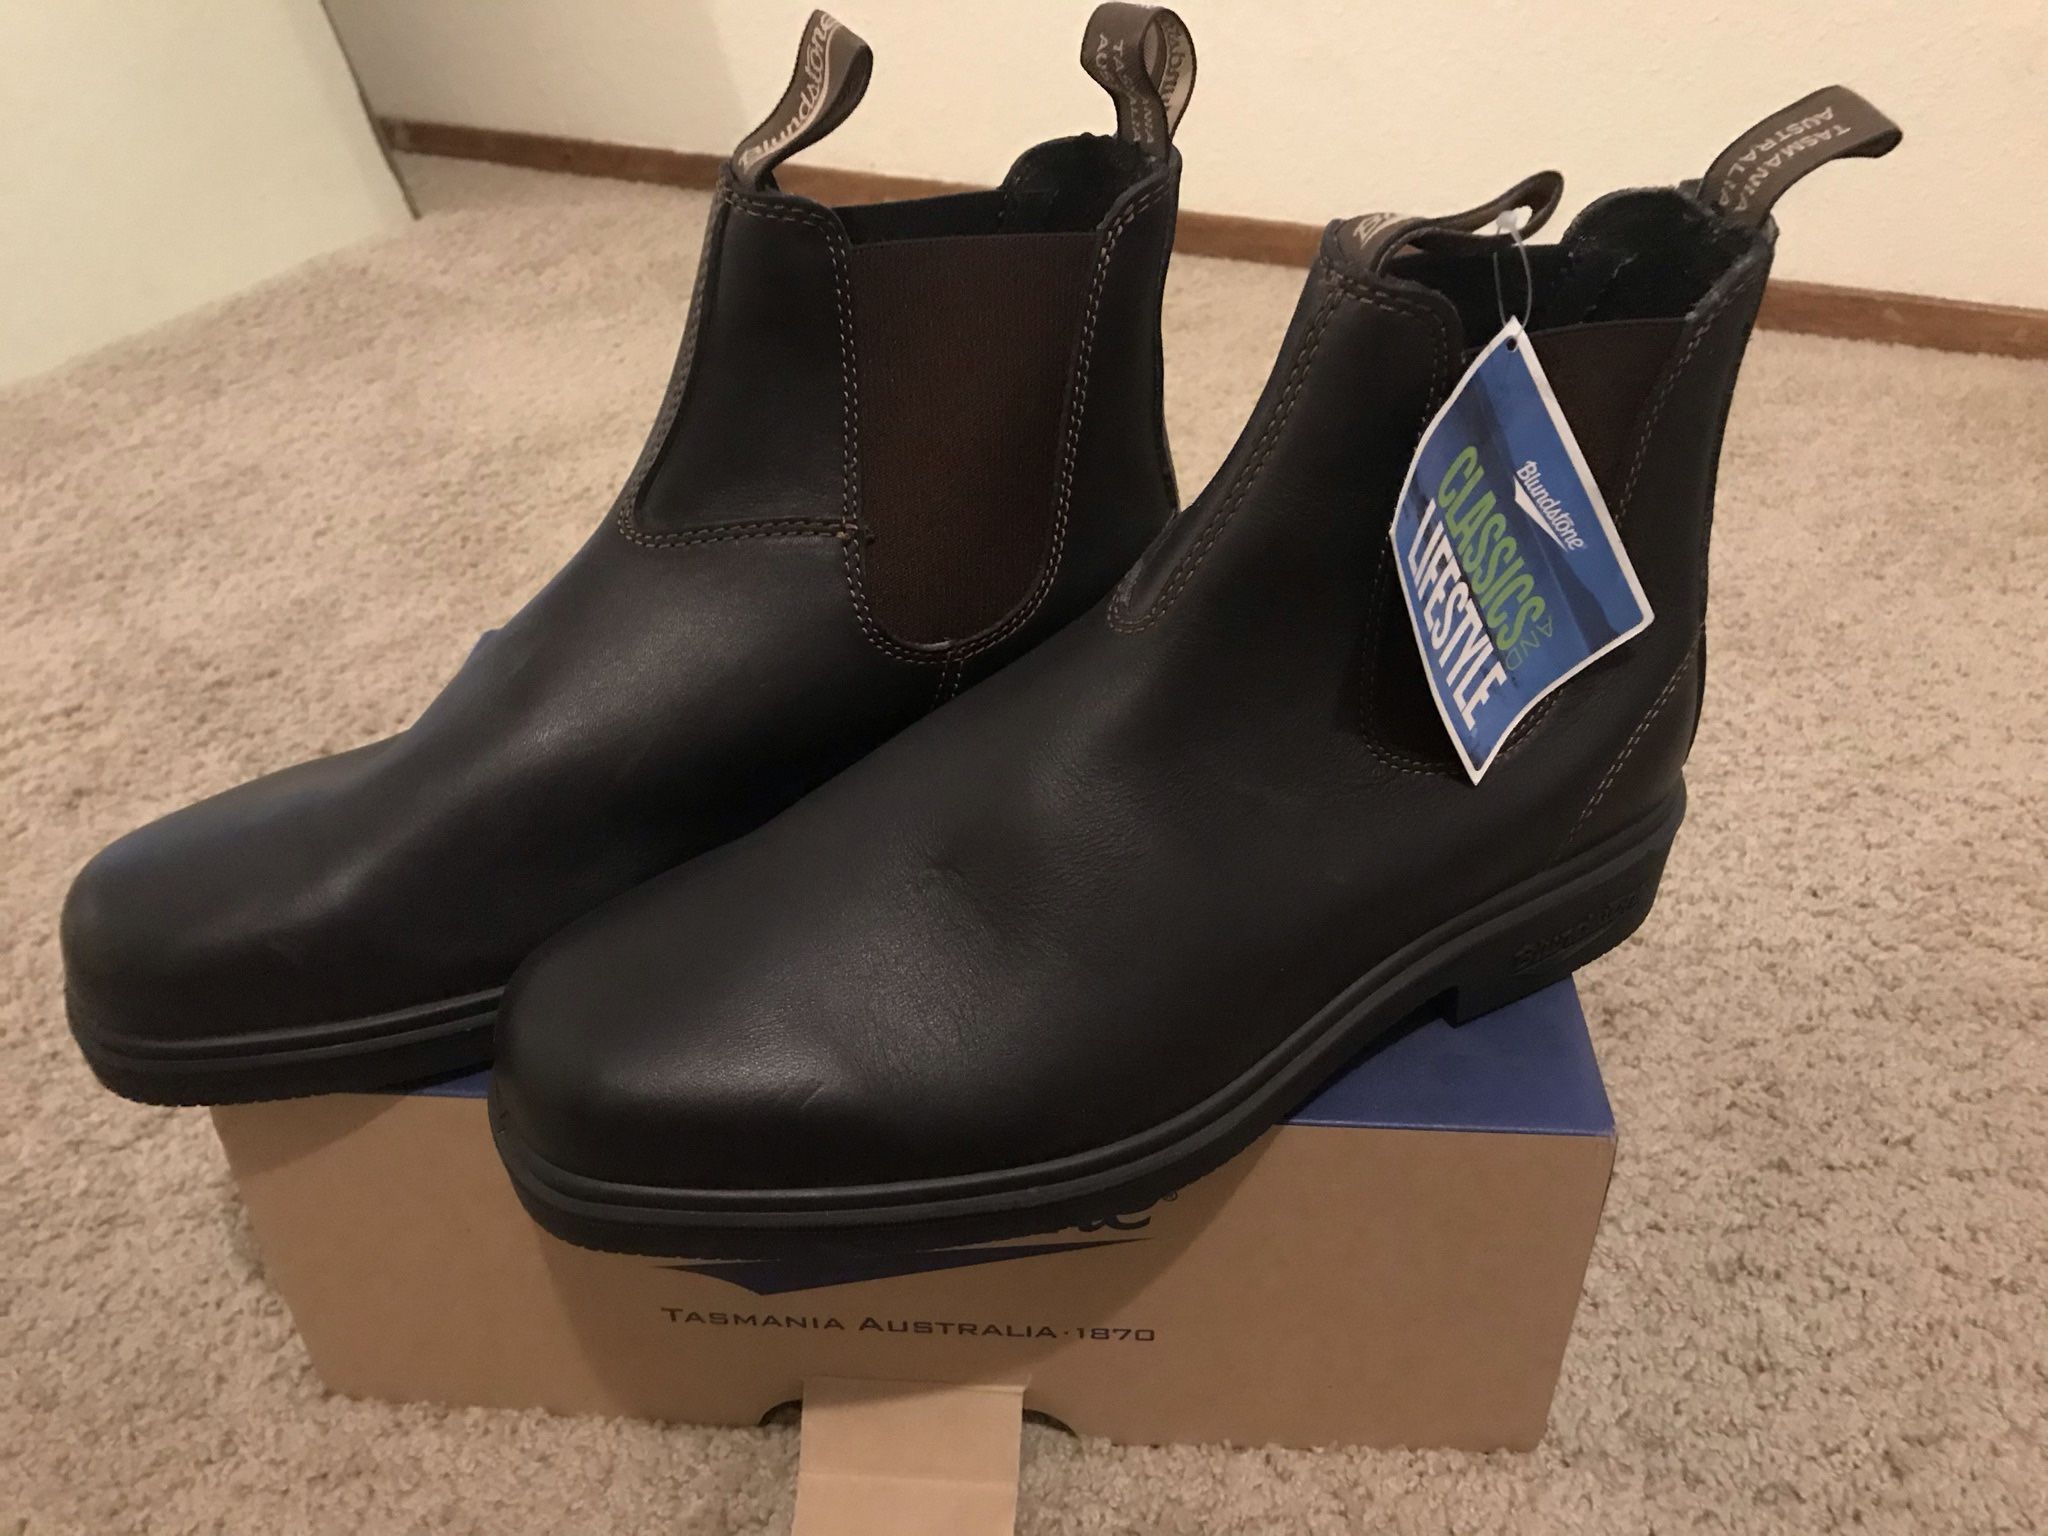 Blundstone Leather Boots 